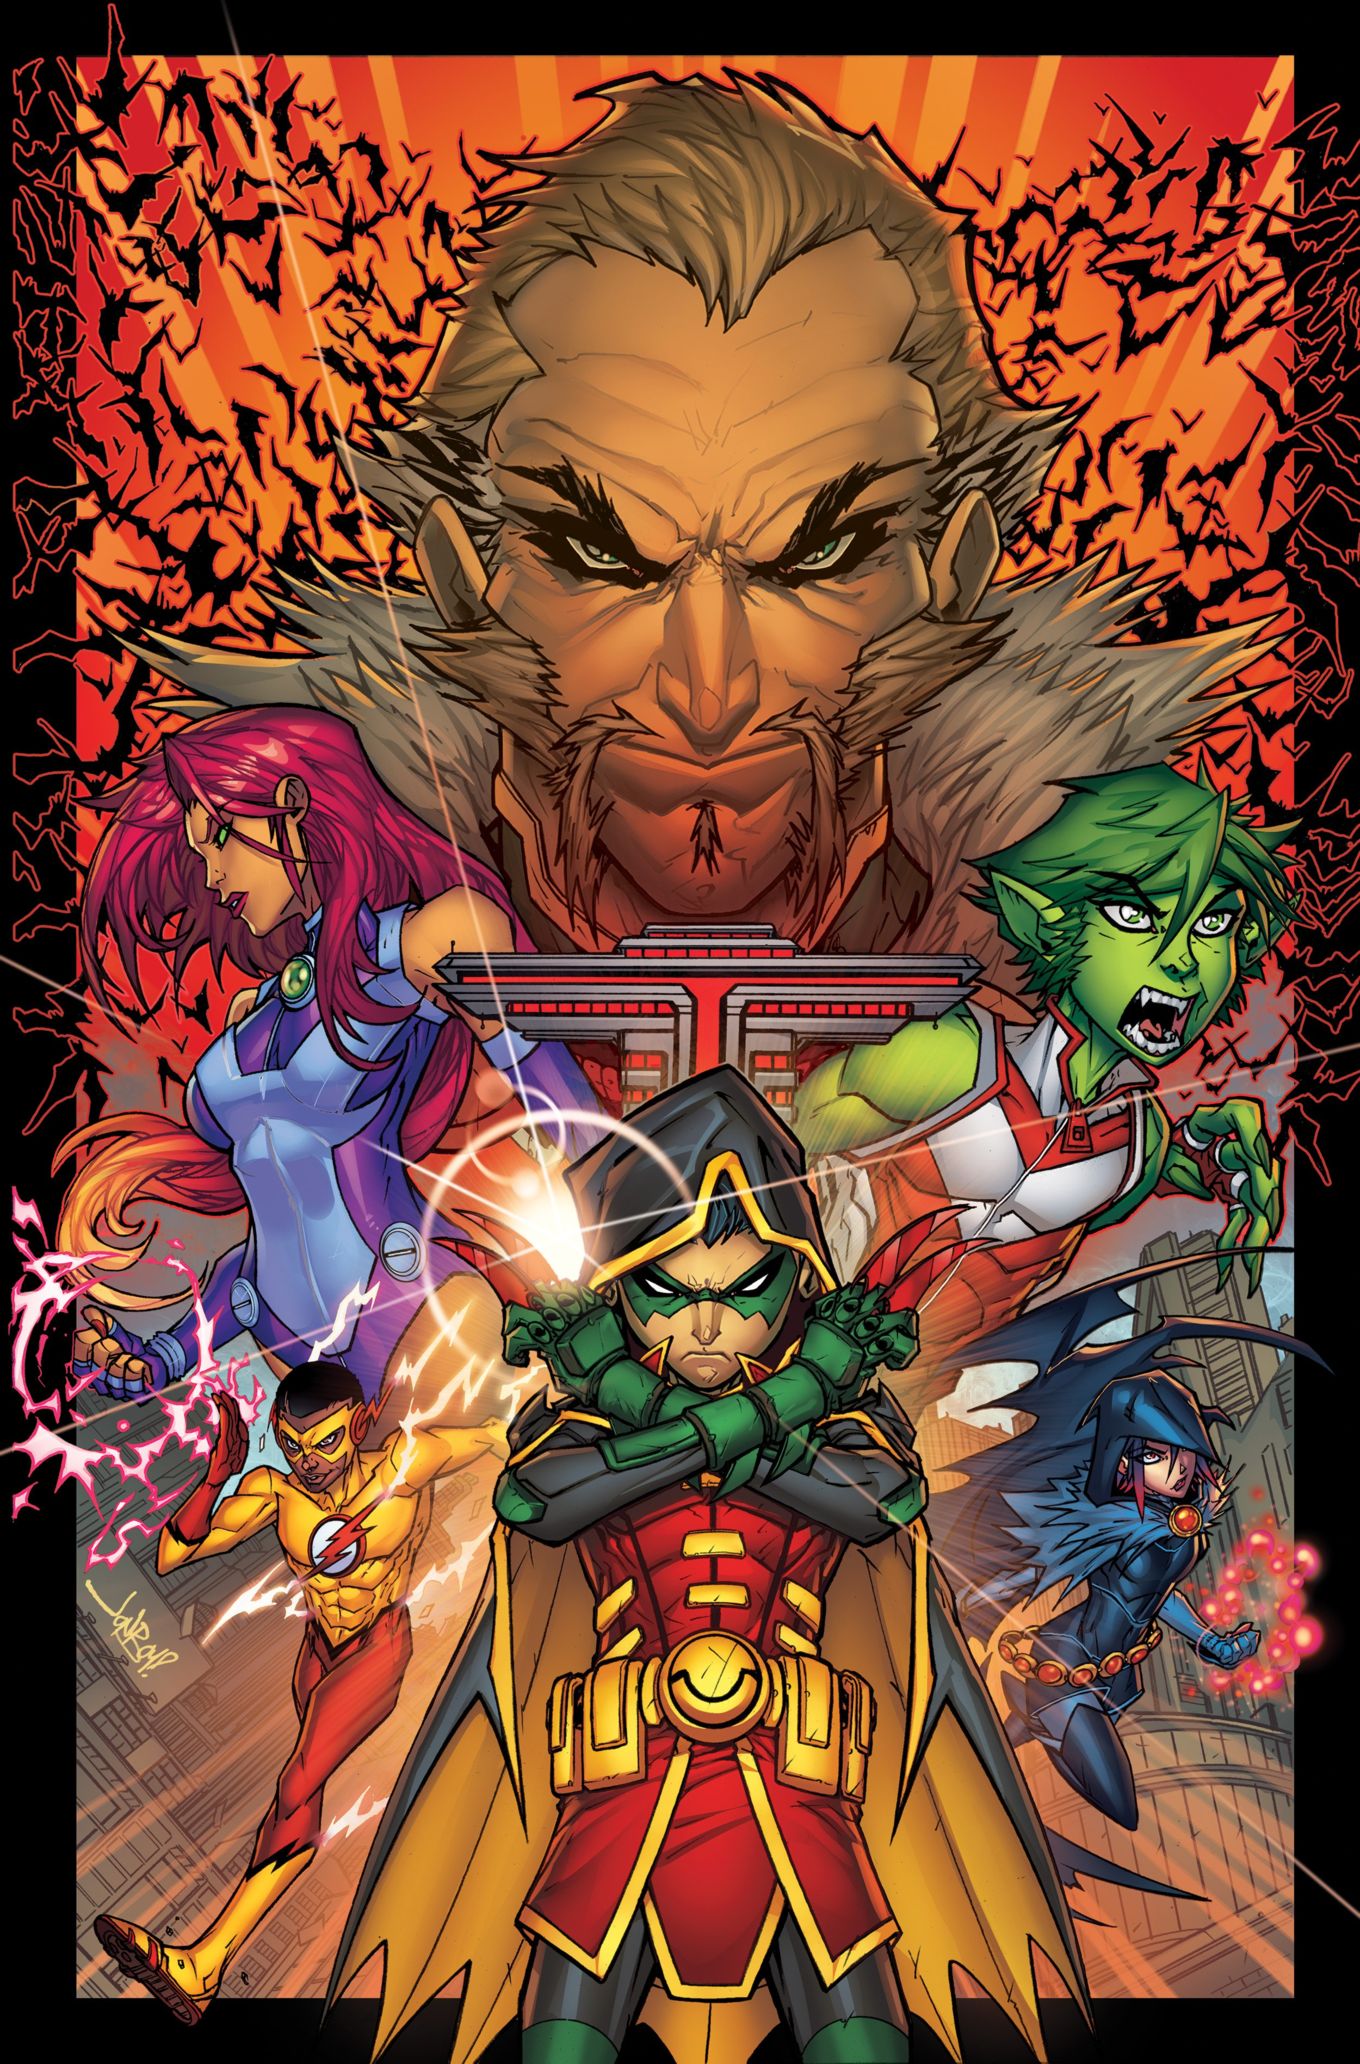 And The Teen Titans 108